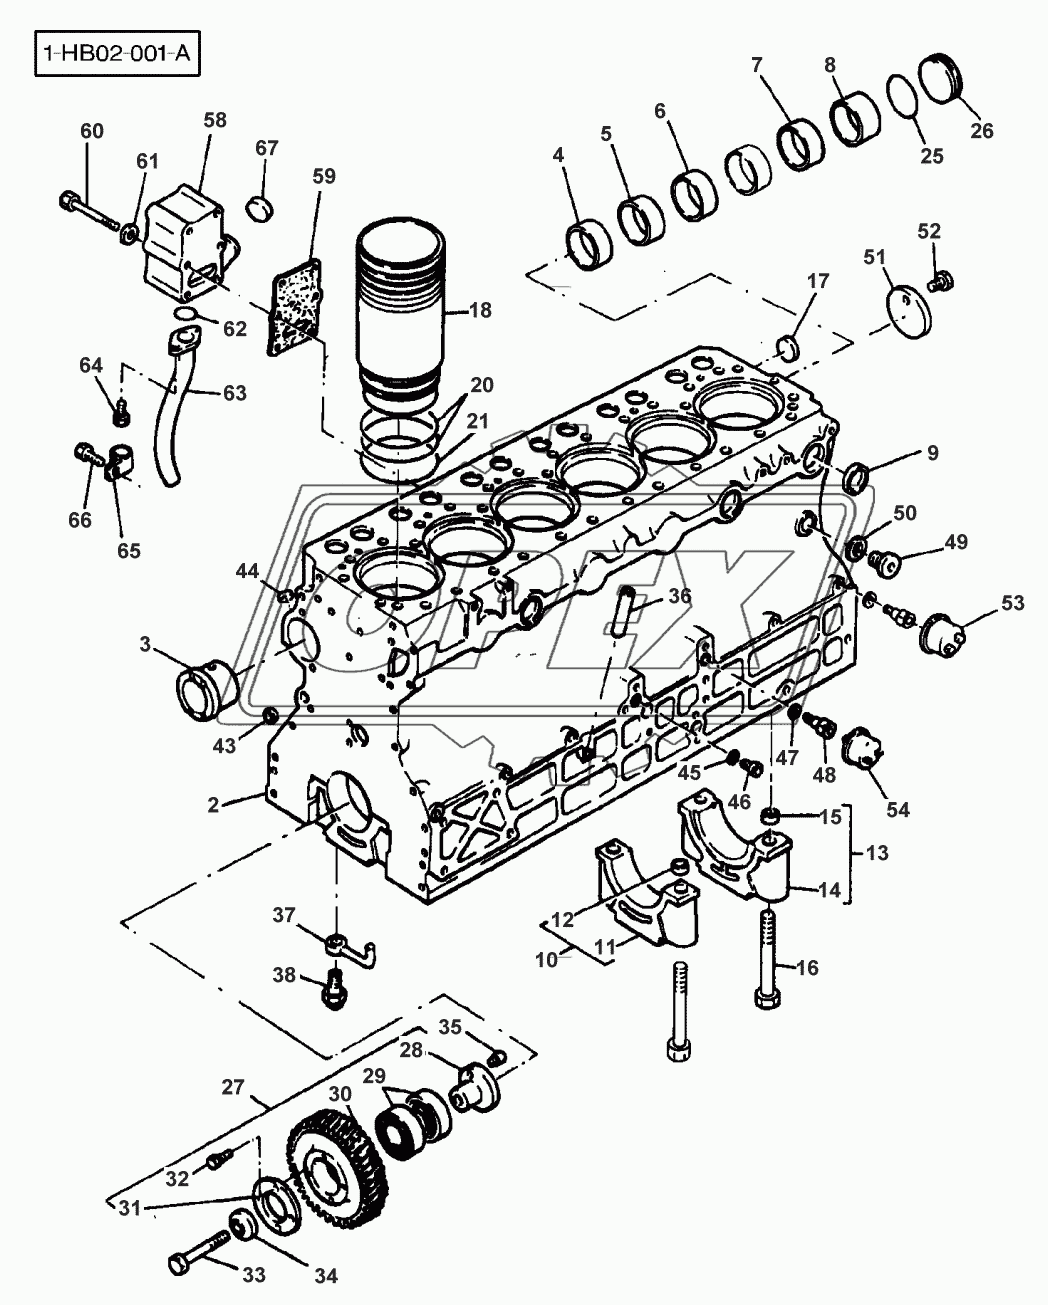 CYLINDER BLOCK - UP TO NO A 2439